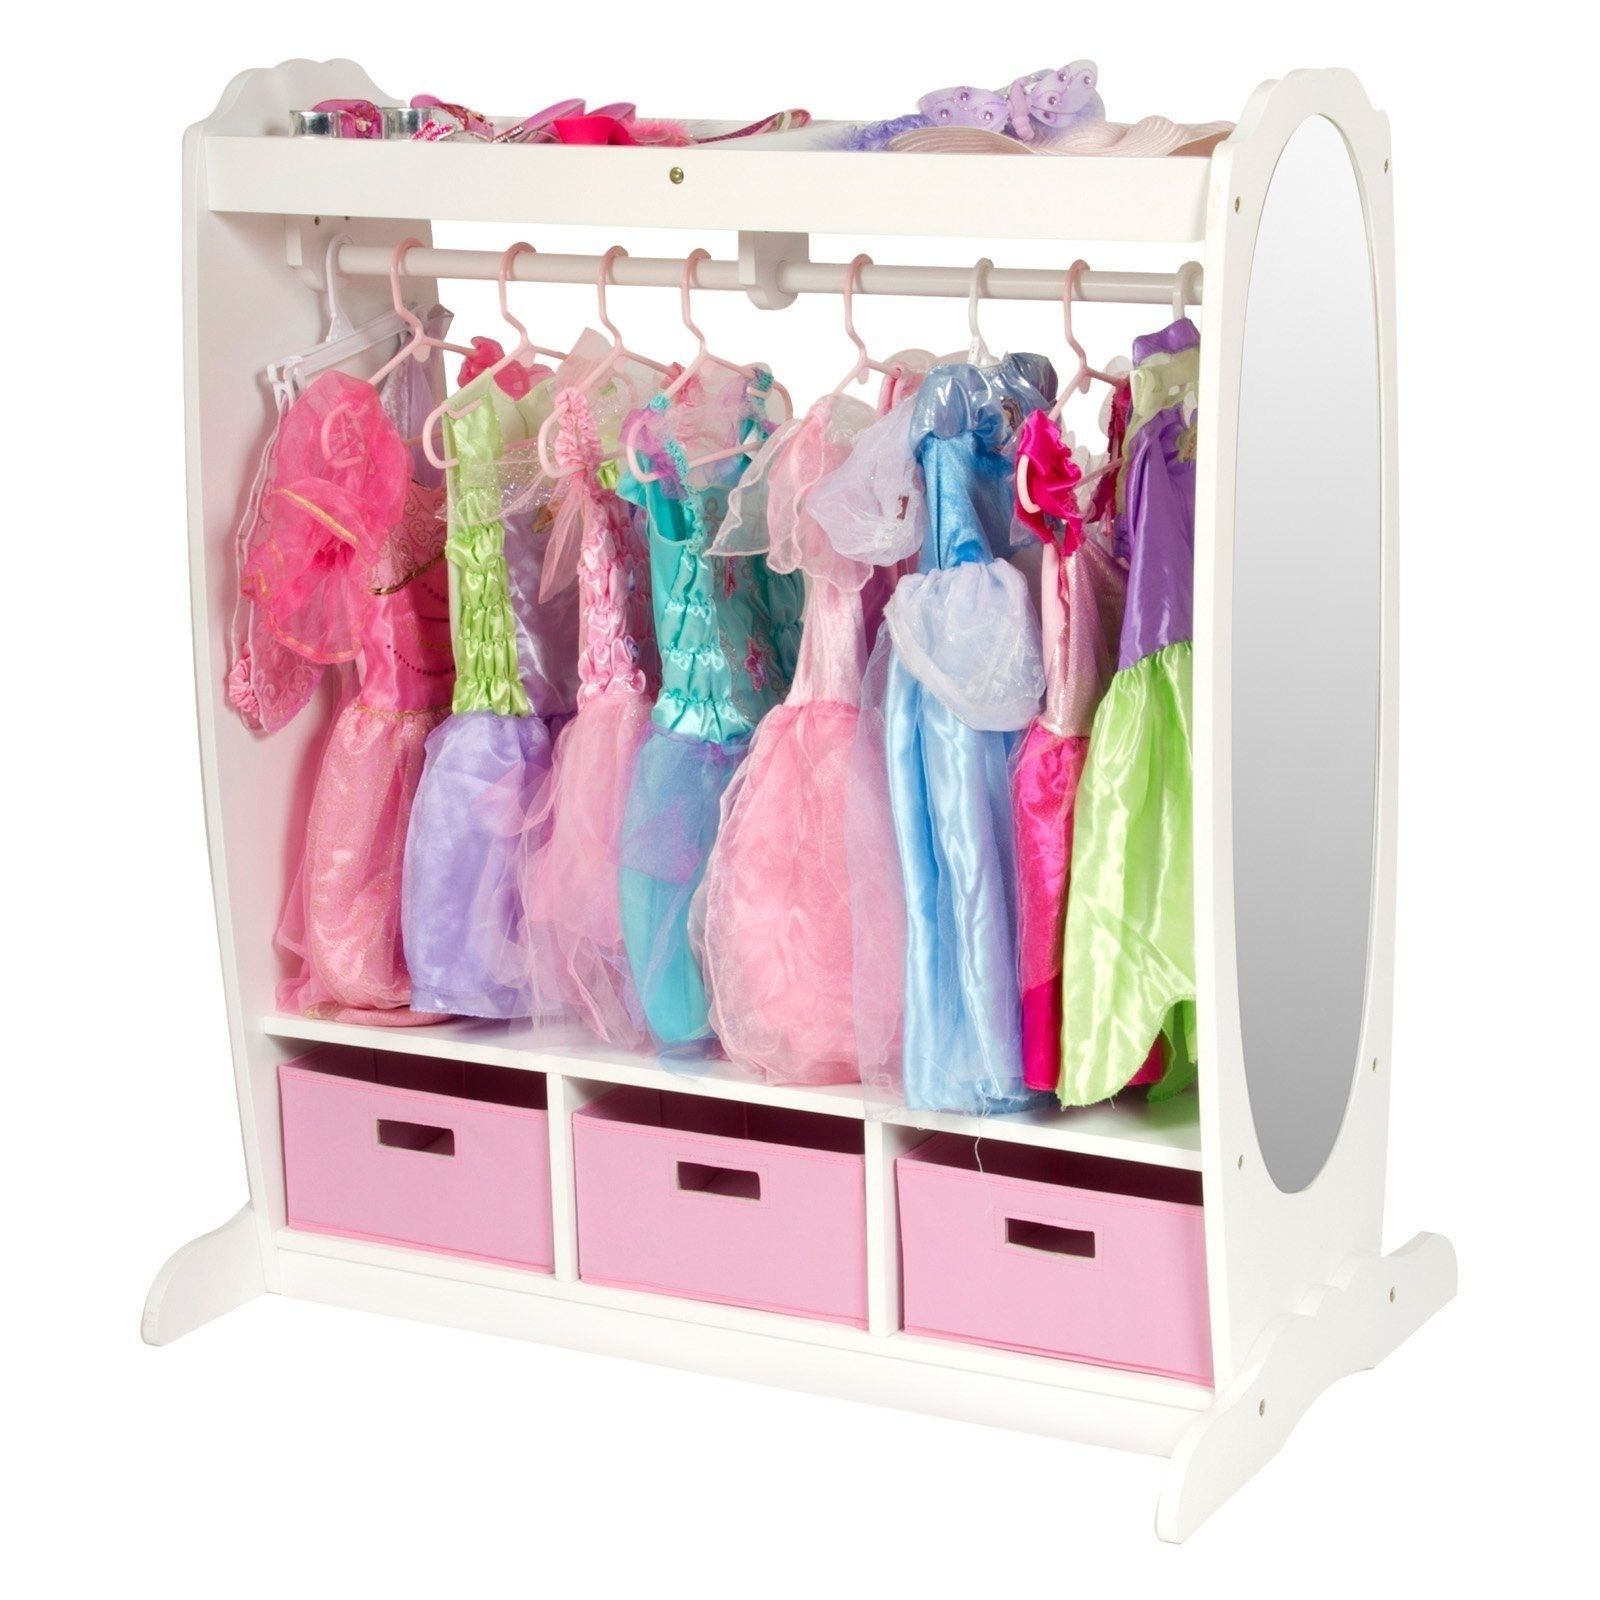 Kids Dress Up Wardrobes Closet With Preferred Mesmerizing Kids Dress Up Wardrobe Fresh Guidecraft Dress Up (View 11 of 15)